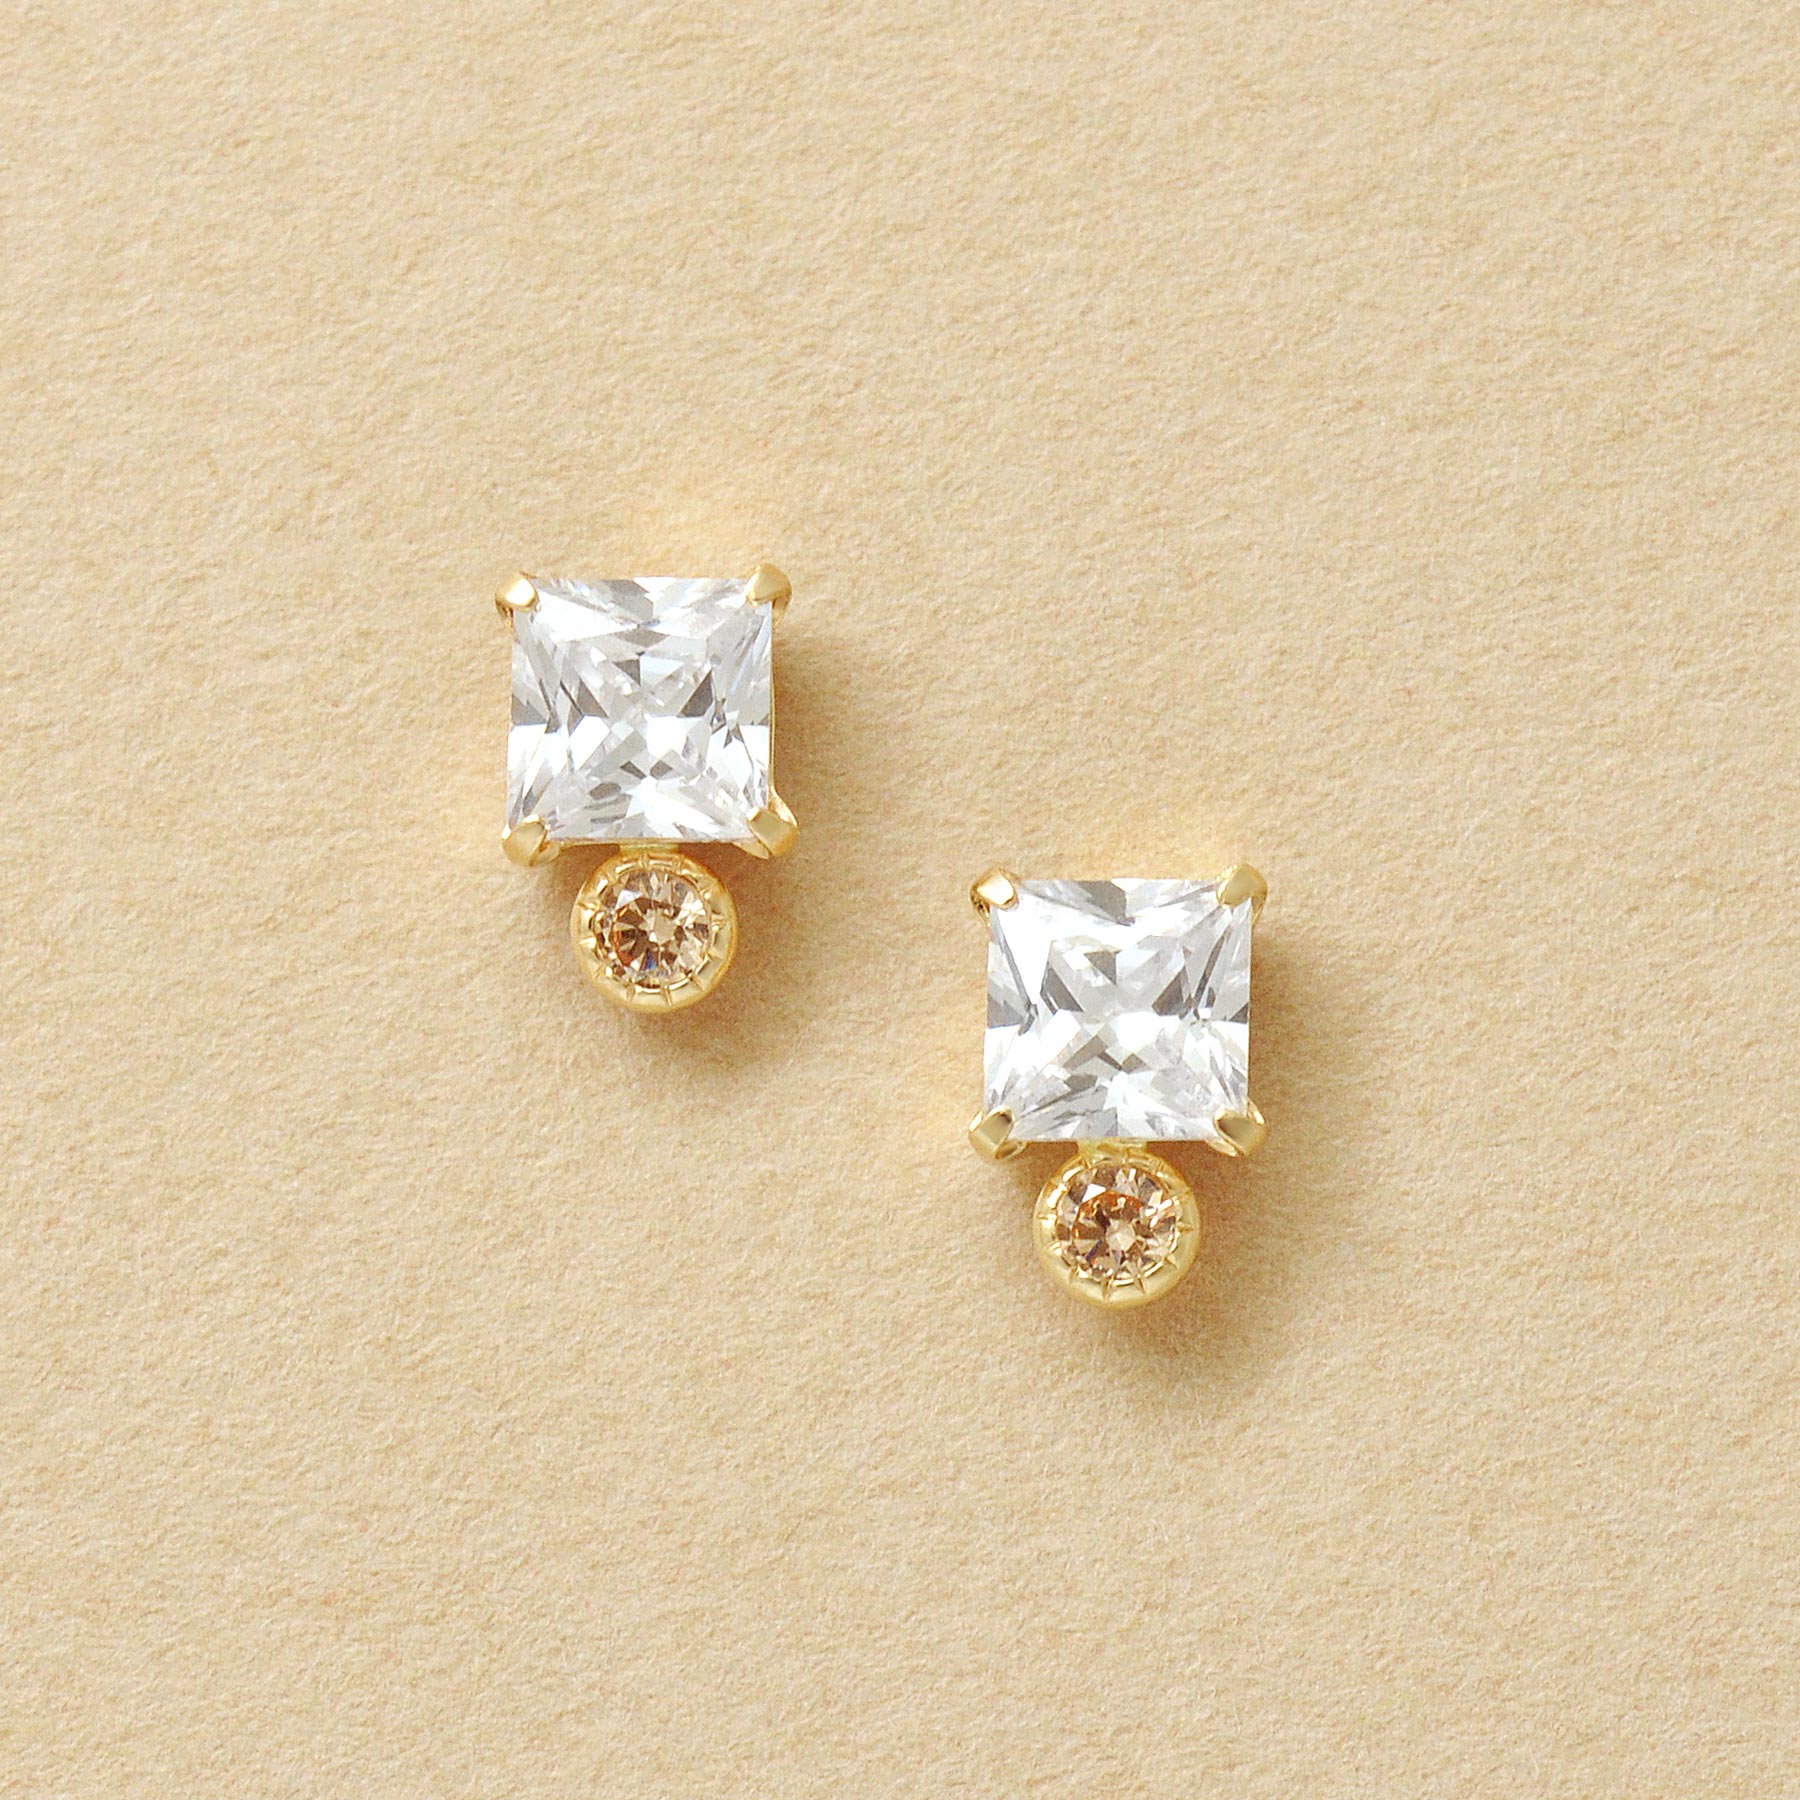 10K Champagne Color Square Stud Earrings (Yellow Gold) - Product Image